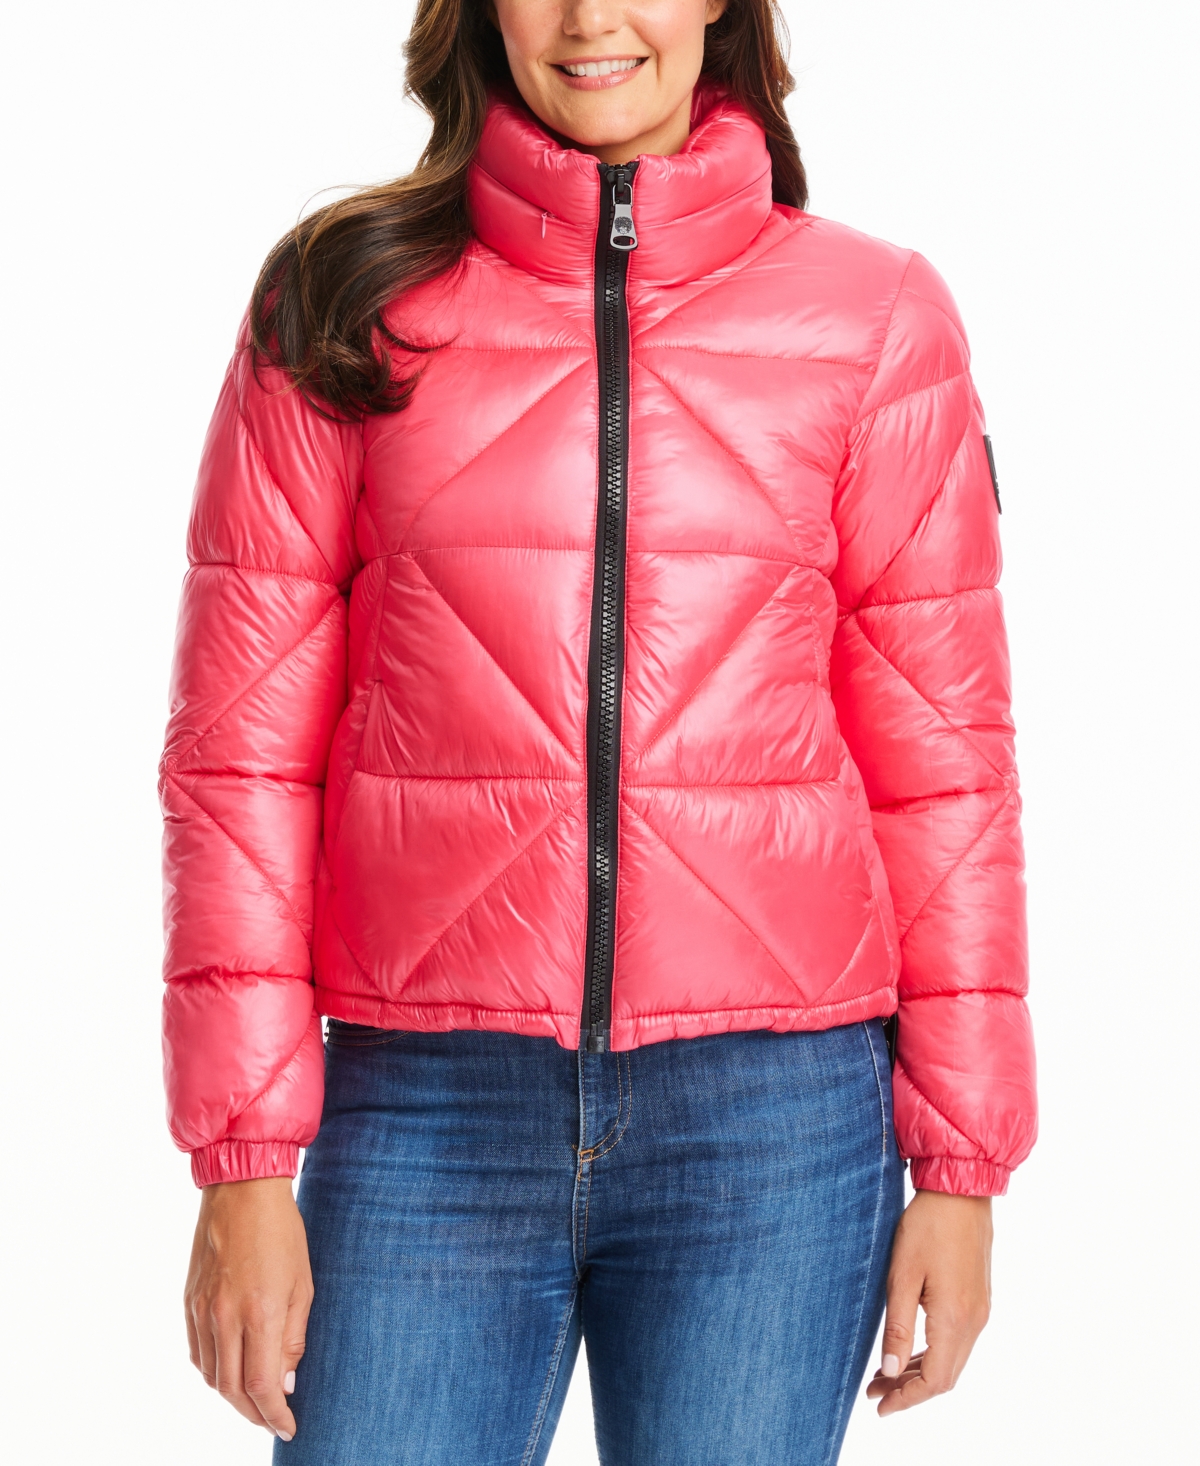 Vince Camuto Women's Shine Hooded Cropped Puffer Coat